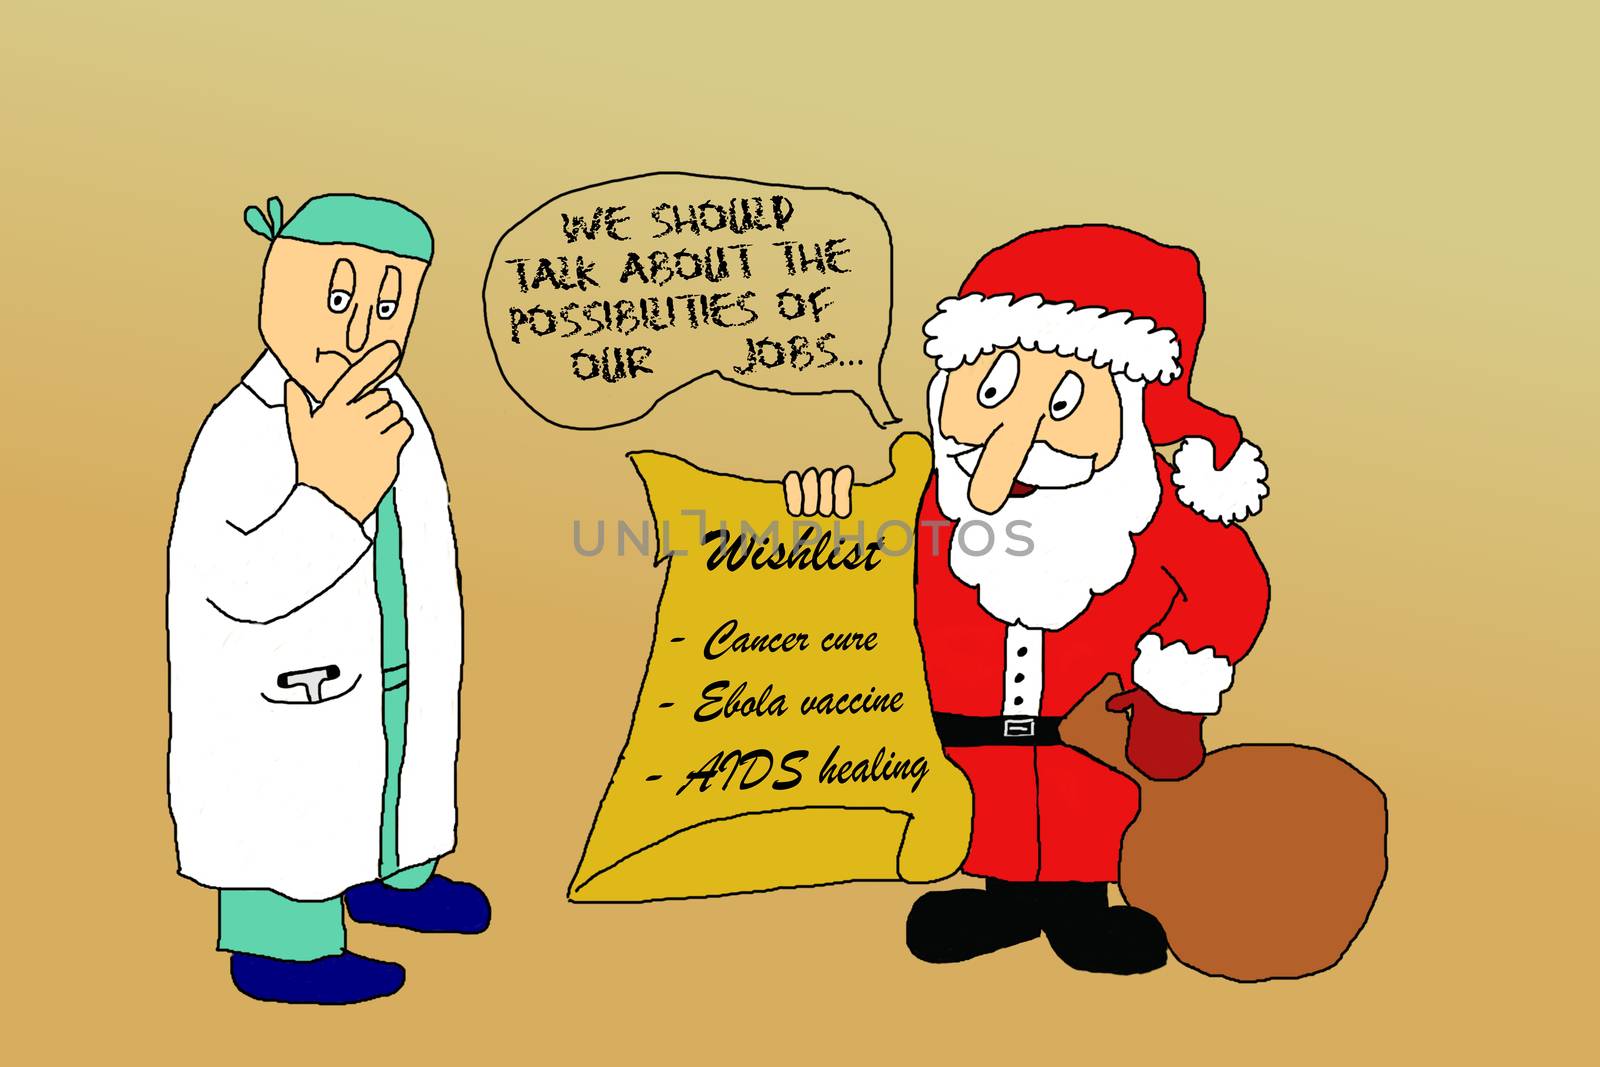 Doctors wishlist for Christmas by gwolters